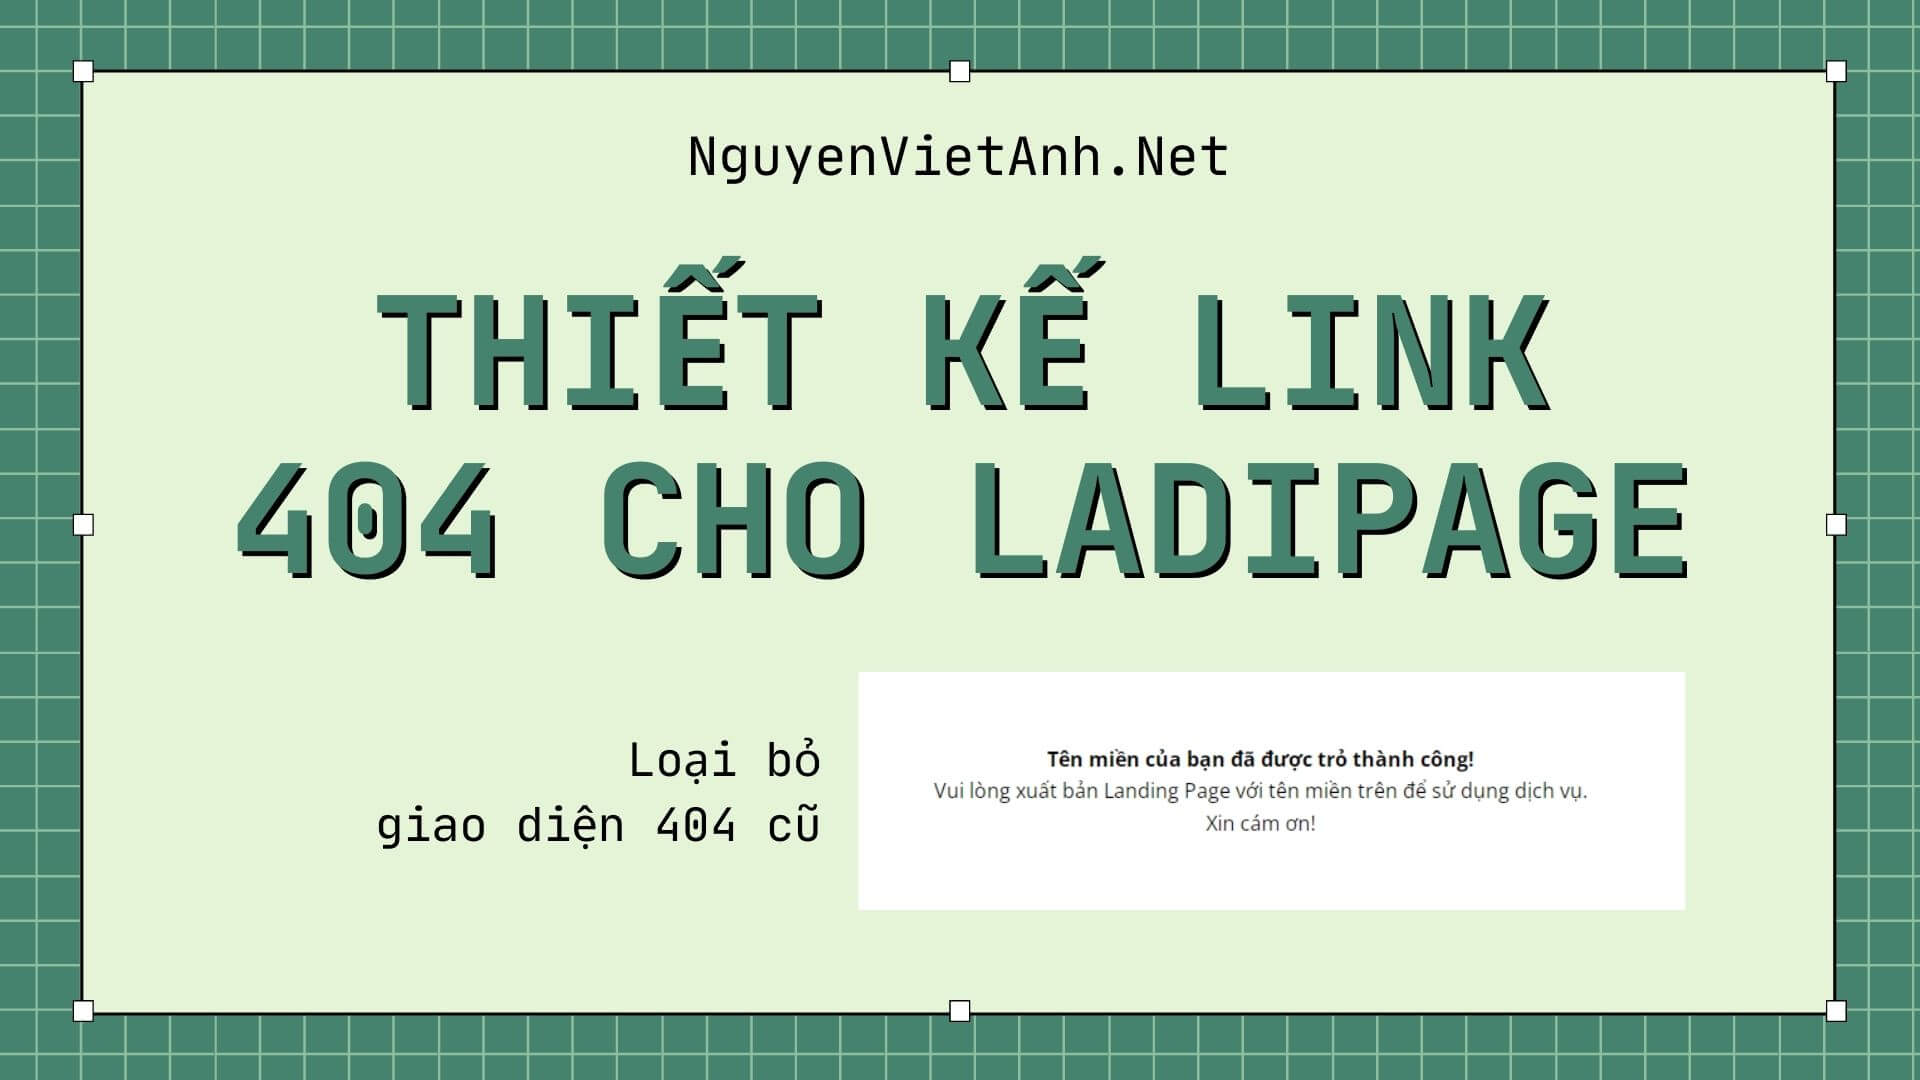 Thiết kế link 404 cho Ladipage